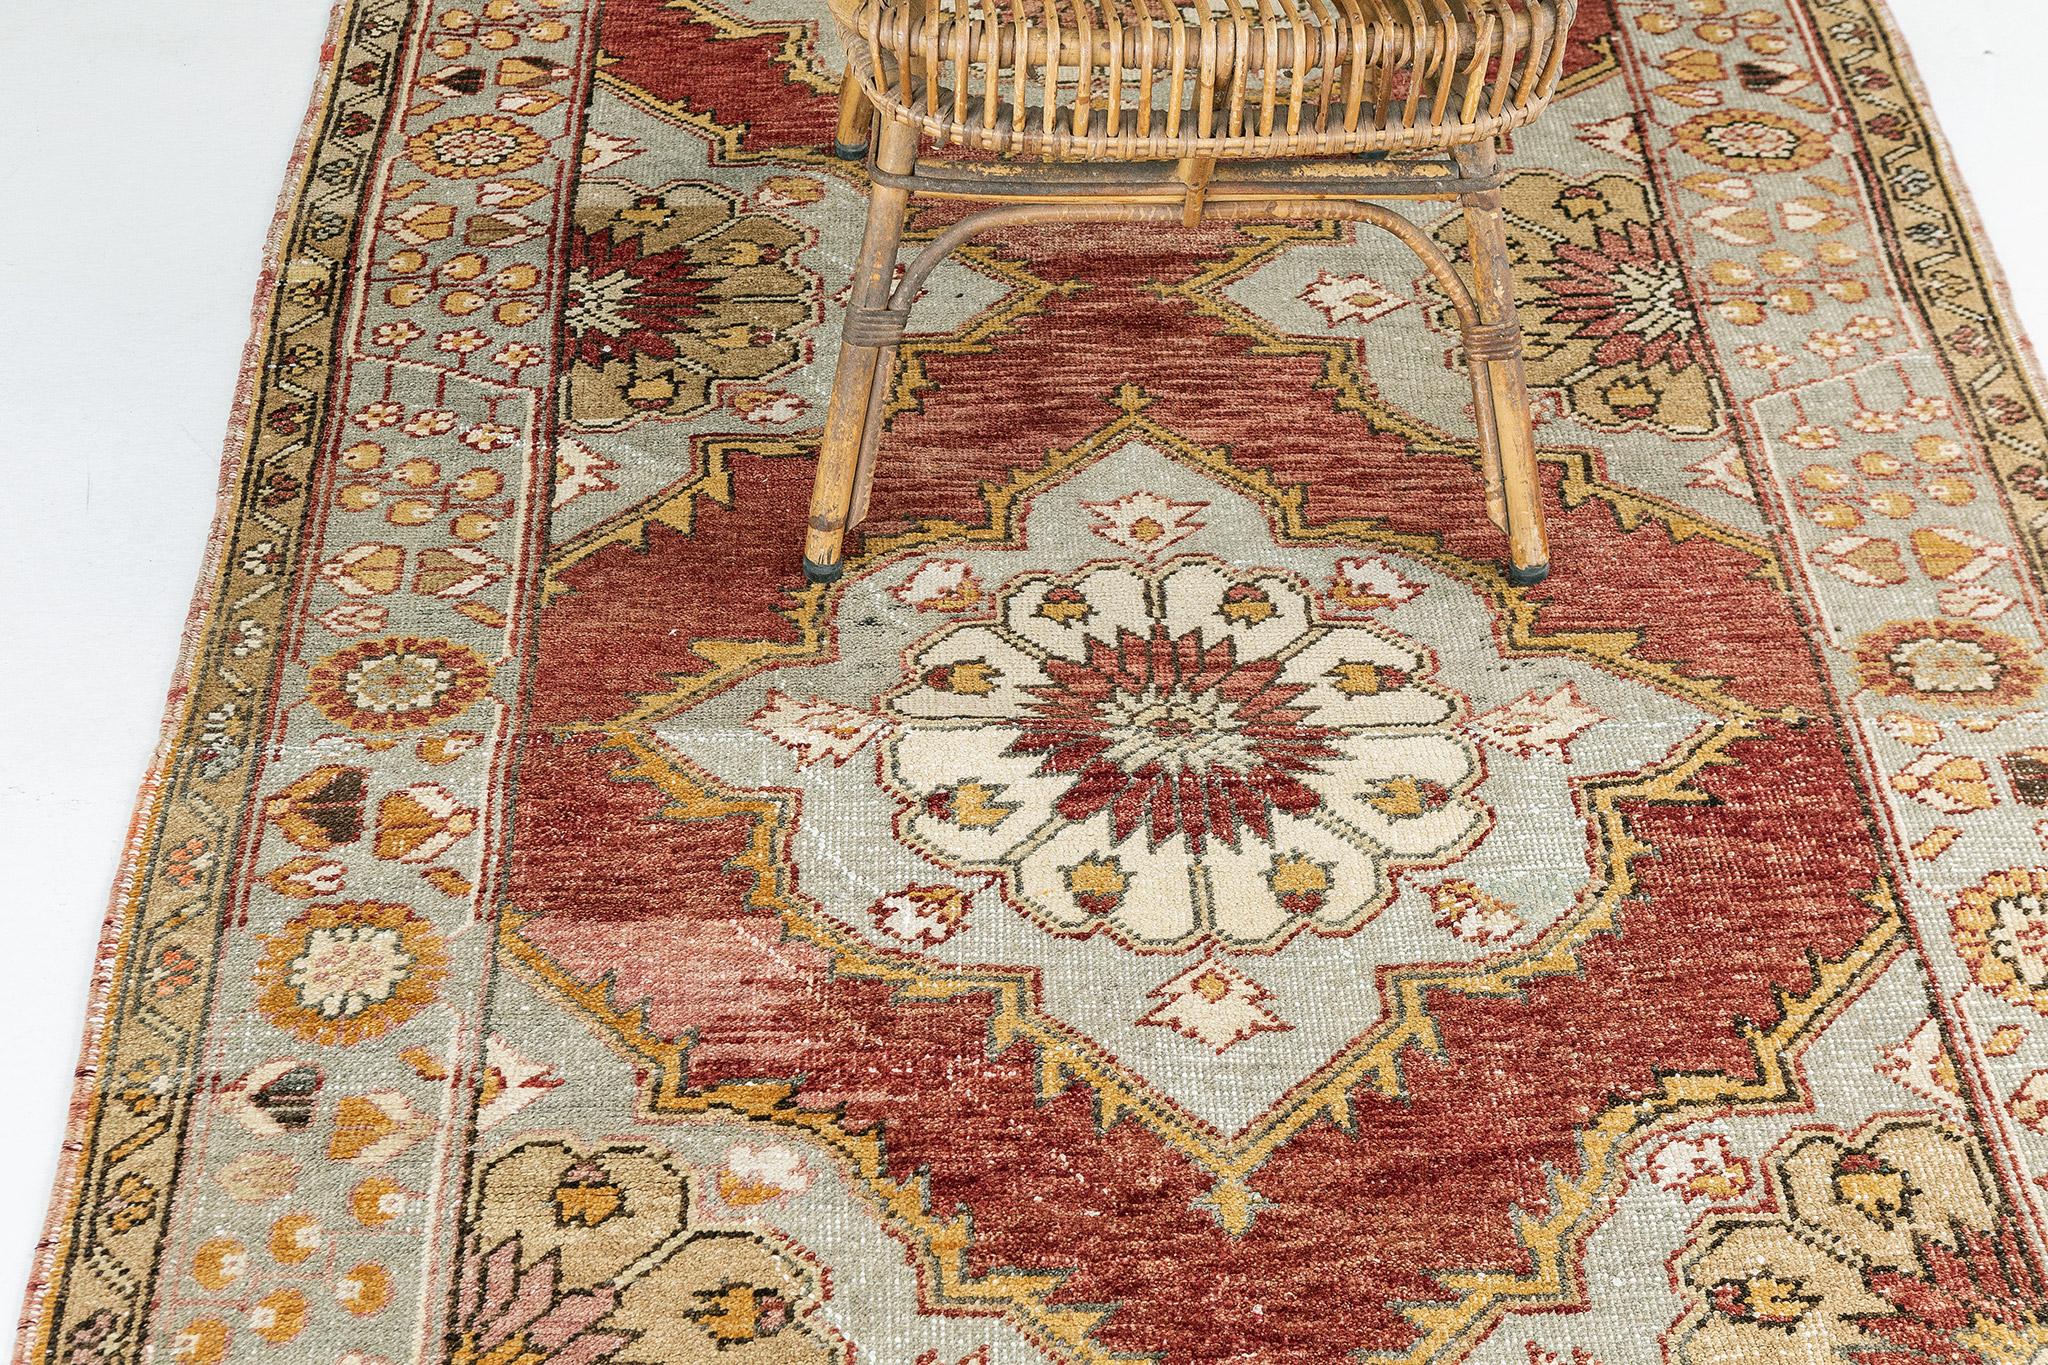 This Vintage Turkish Anatolian Runner features an all-over array of lozenge botanical medallions composed blossoms and stylized florals laying on the coral and terracotta field. A stylized botanical Meander border flanked with inner and outer flower